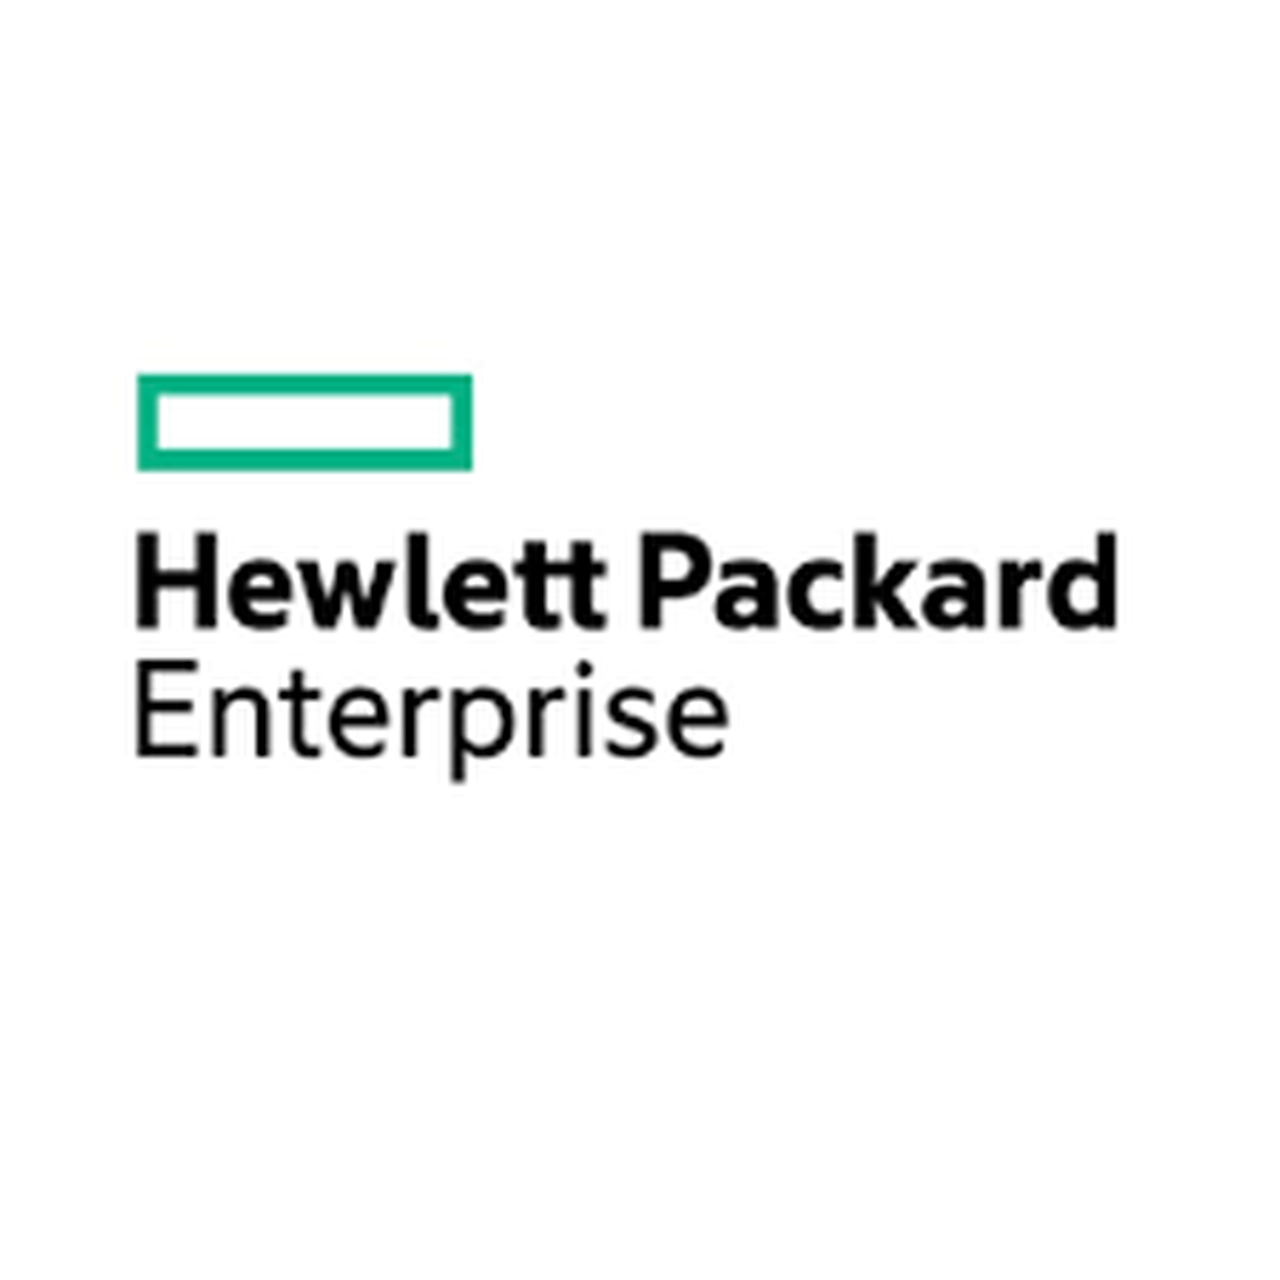 HPE 1 Year Post Warranty Foundation Care, Next Business Day wCDMR BL2x220c G7 Service